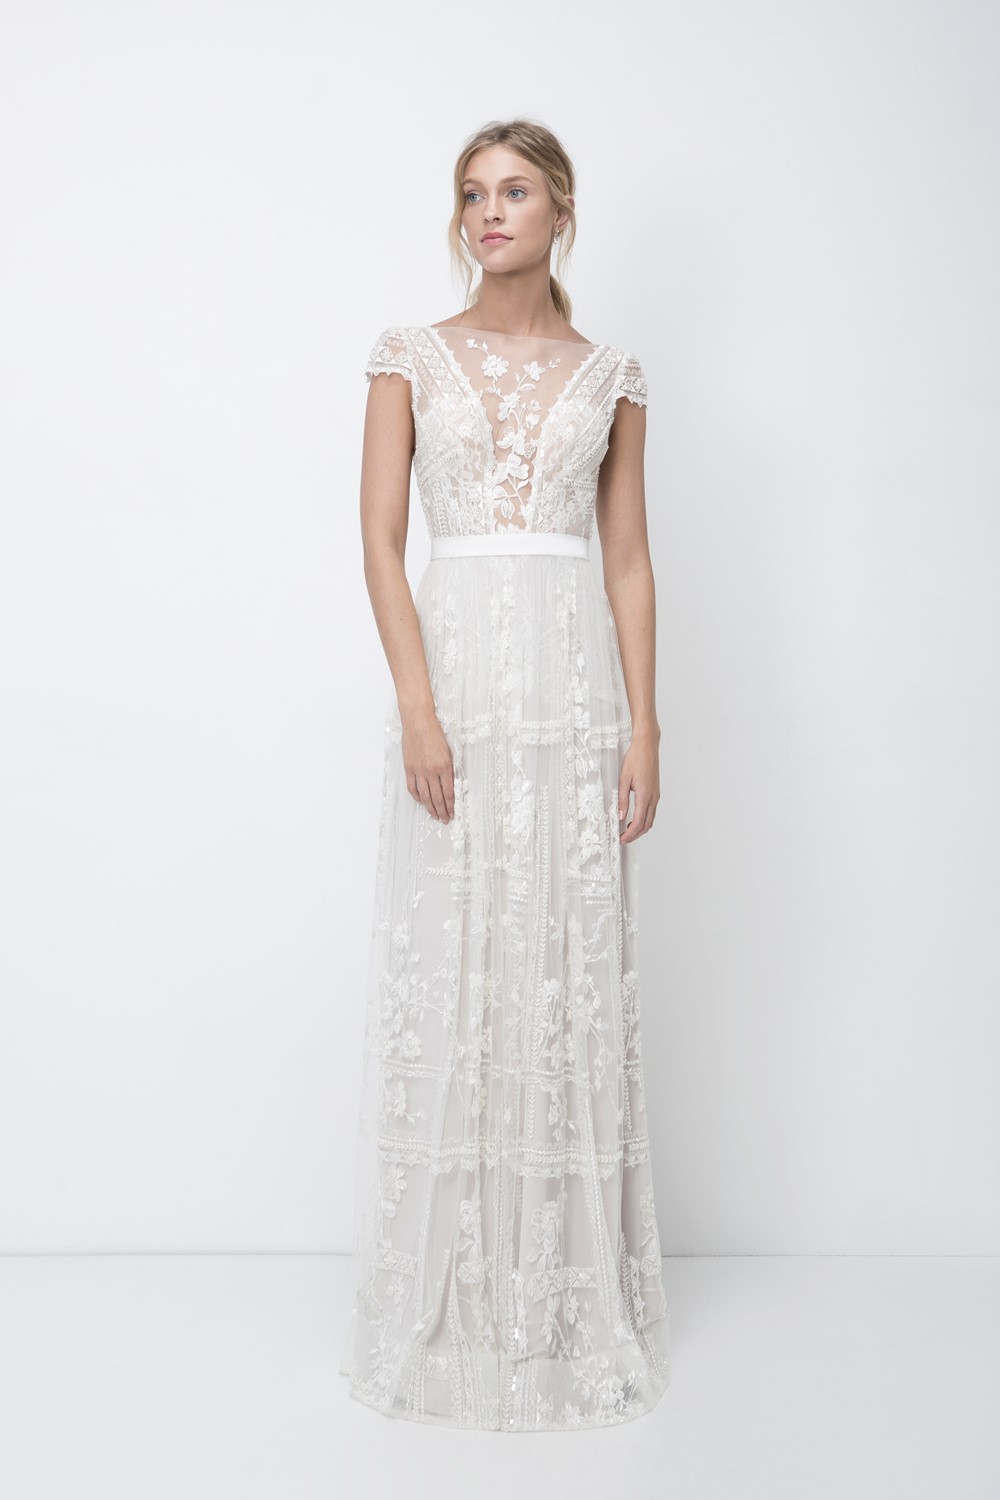 Celia Wedding Dress from Lihi Hod's 2018 Bridal Collection